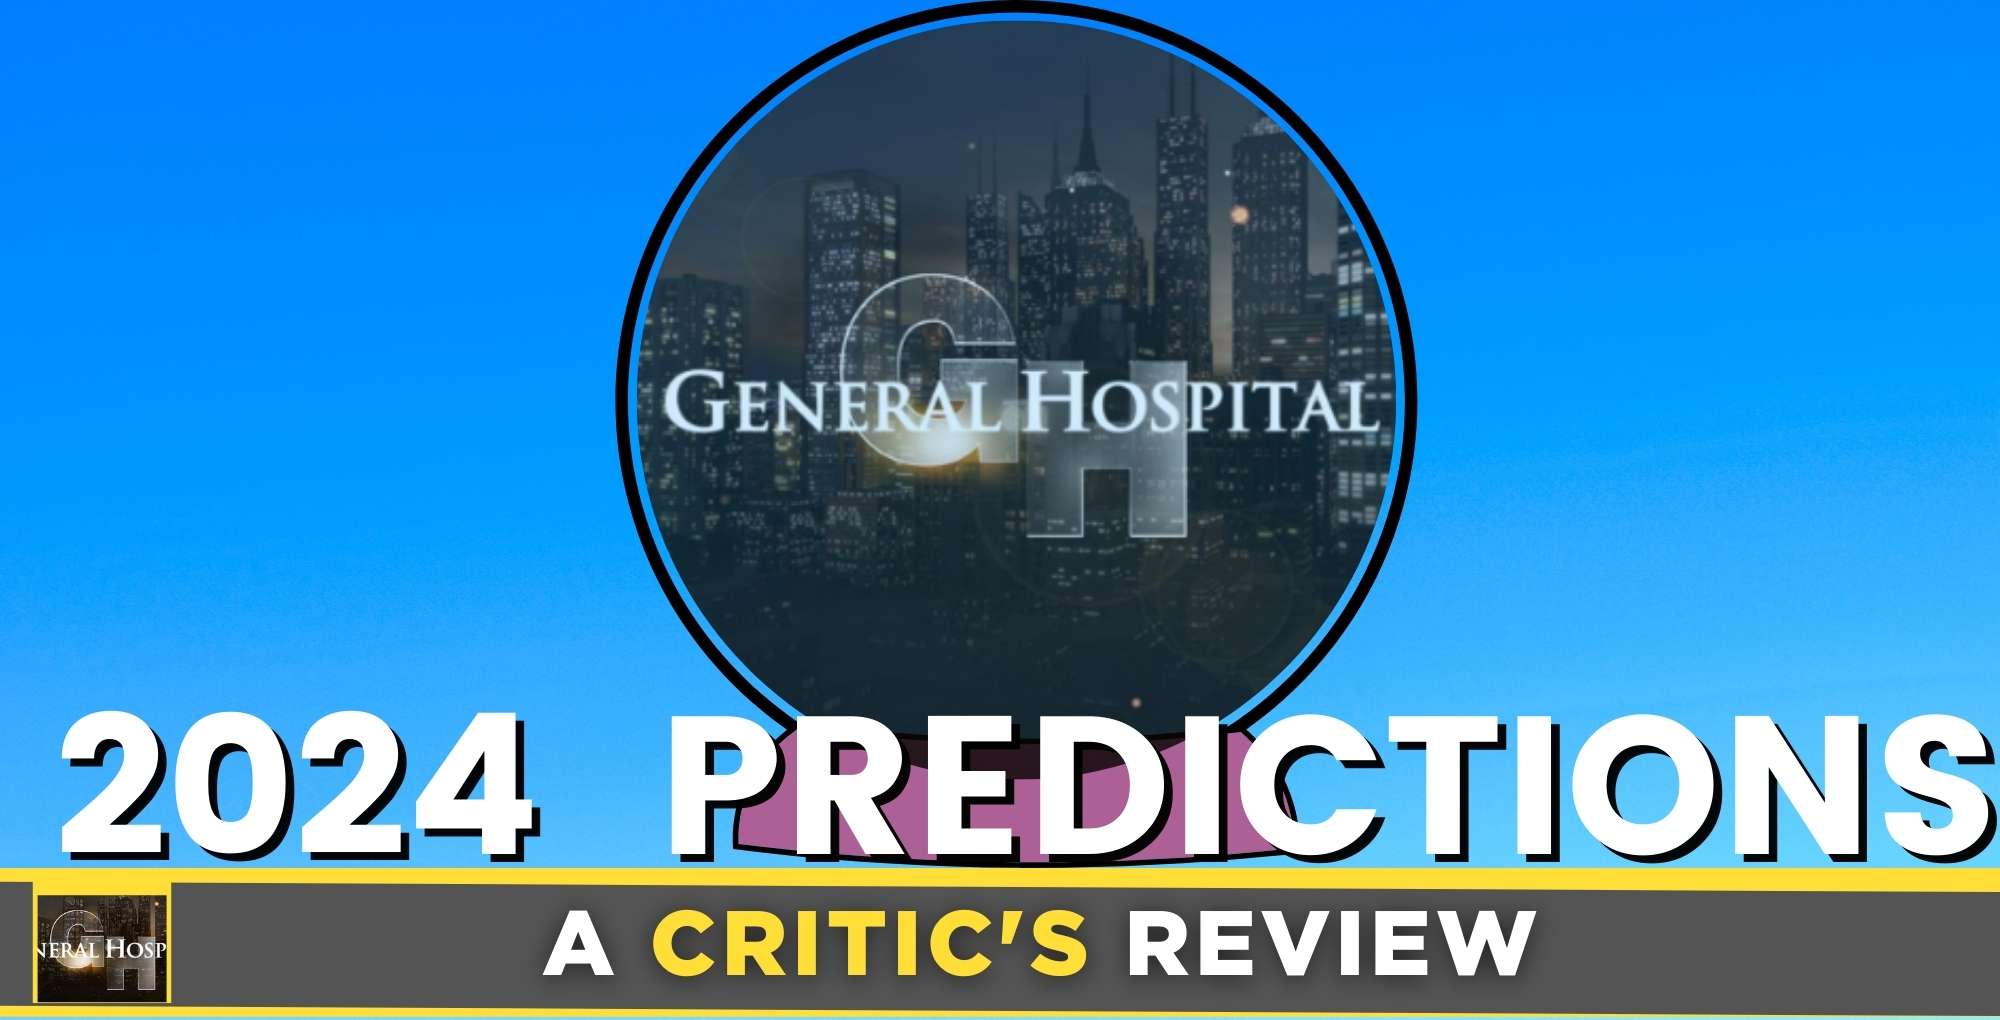 a critic's review of general hospital, predictions for 2024.